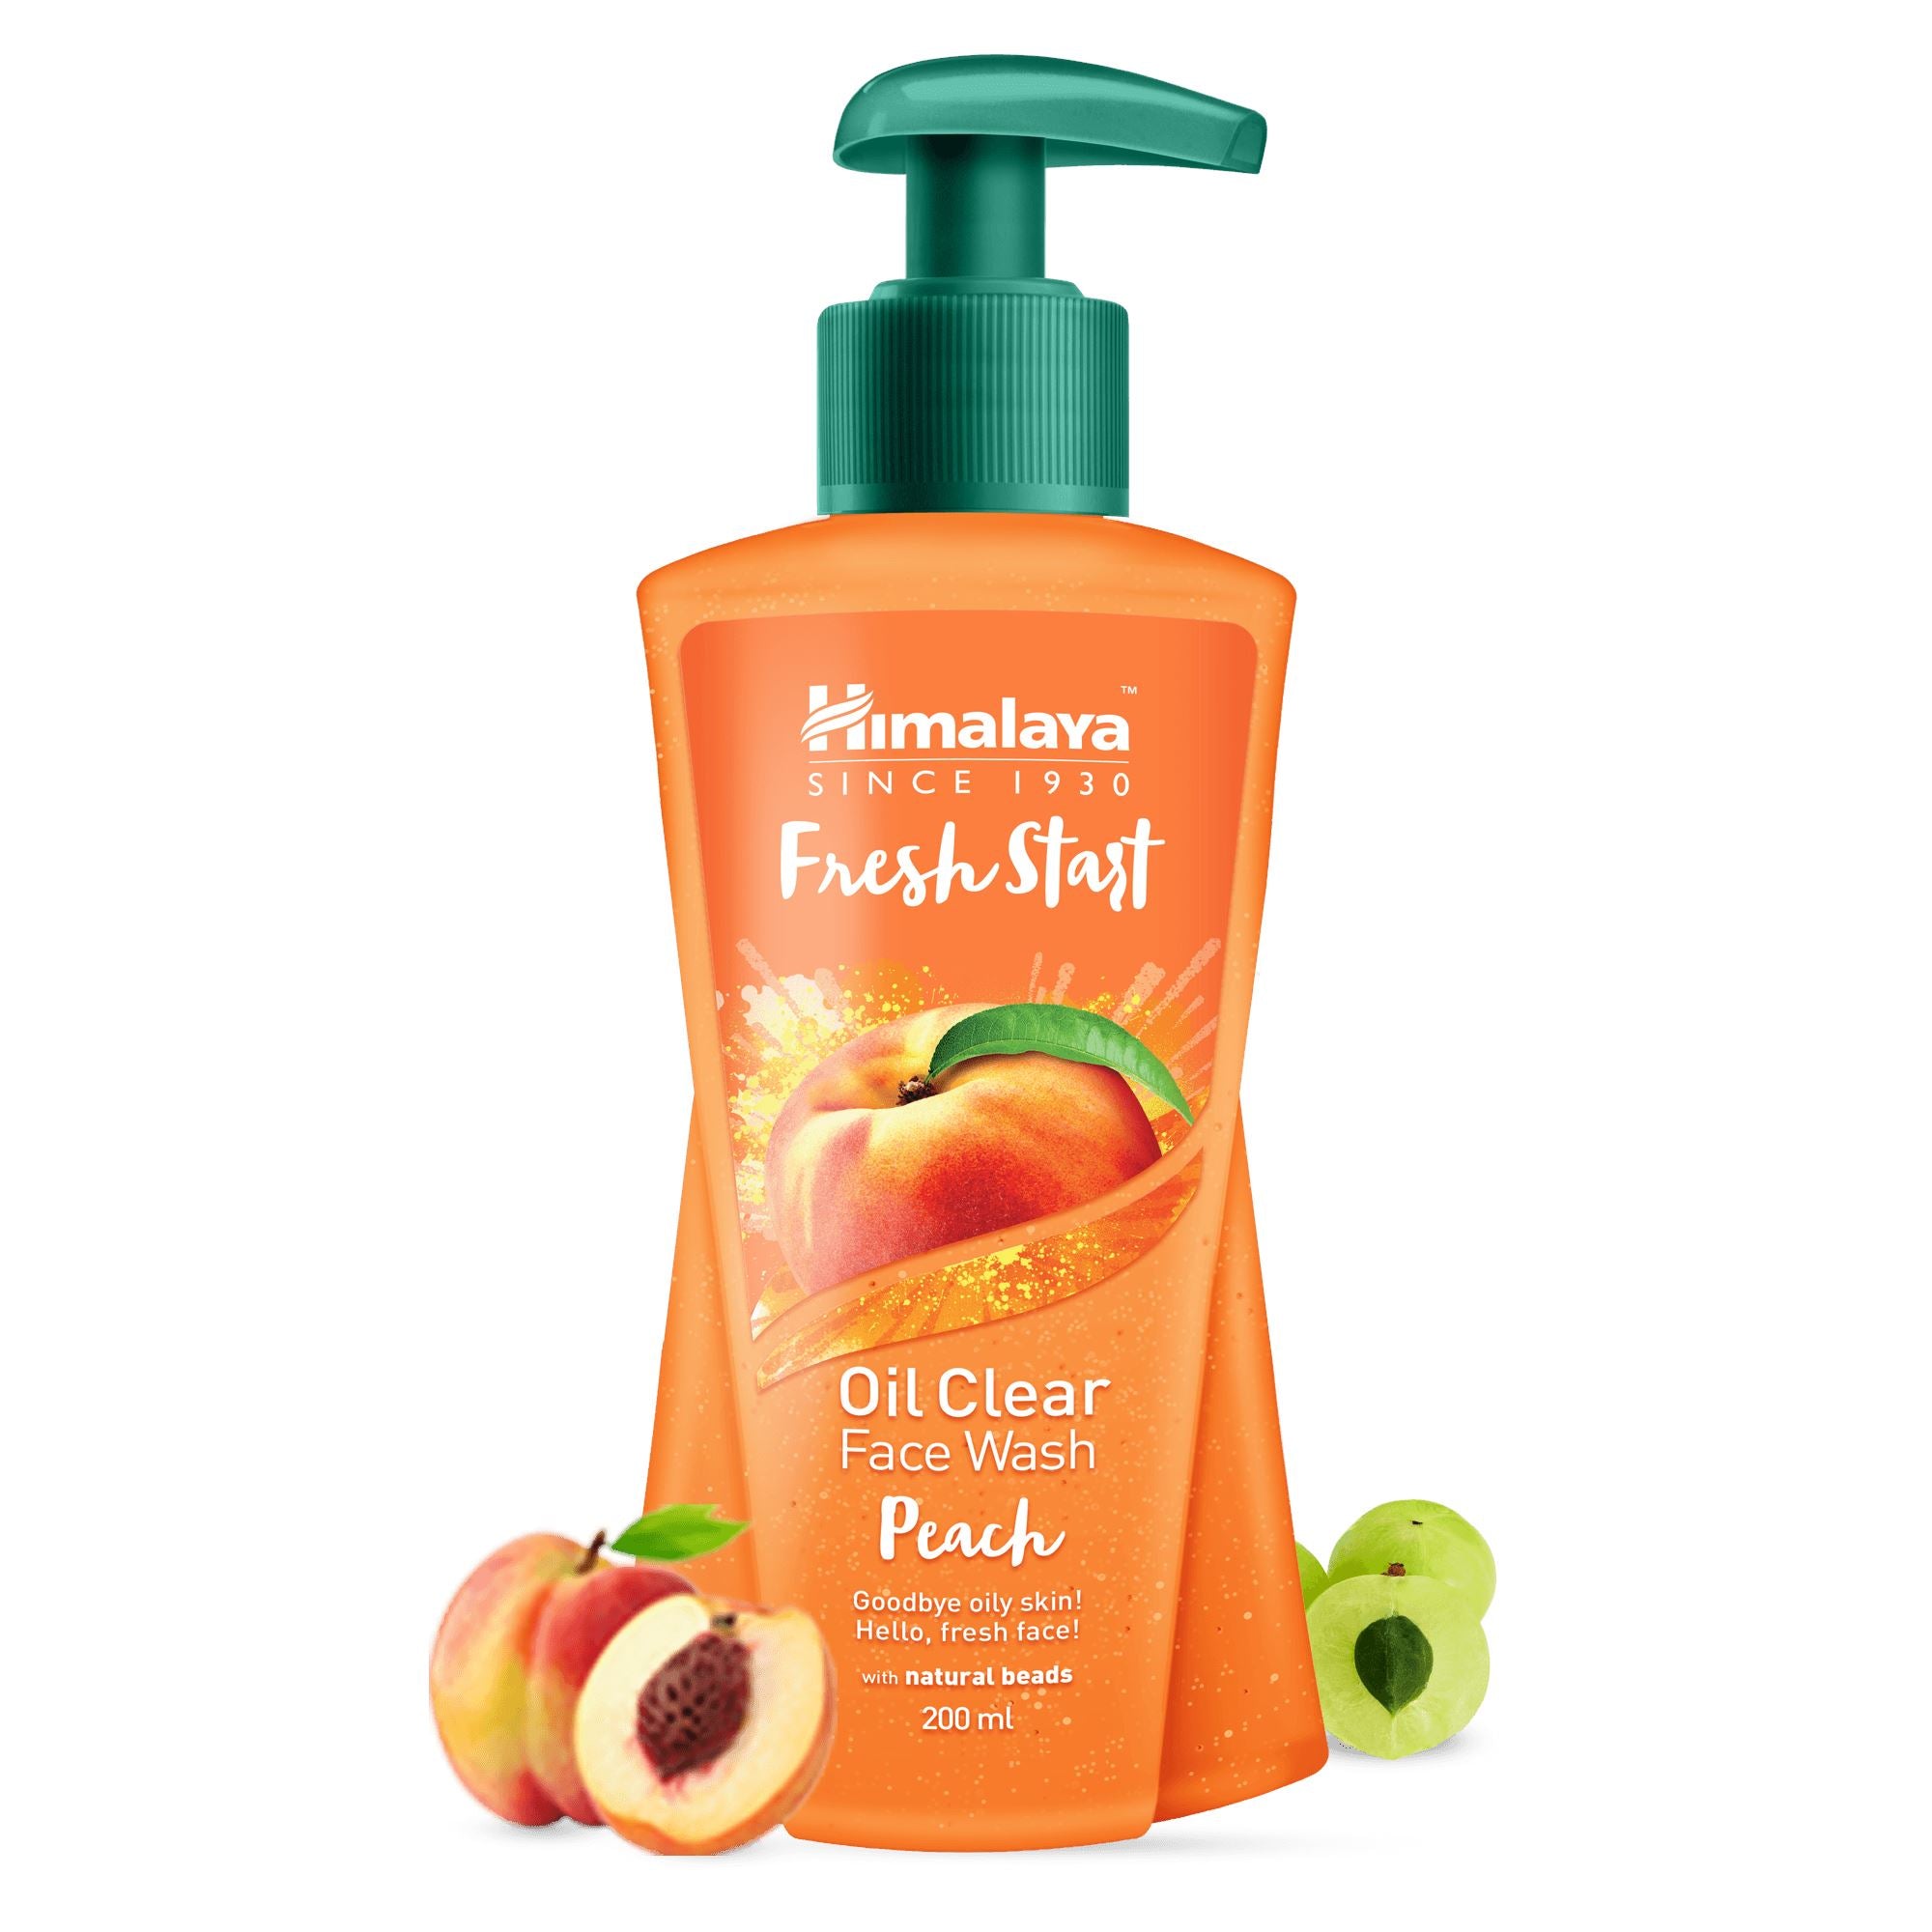 Himalaya Fresh Start Oil Clear Peach Face Wash 200ml - Helps remove excess oil, dirt, and impurities